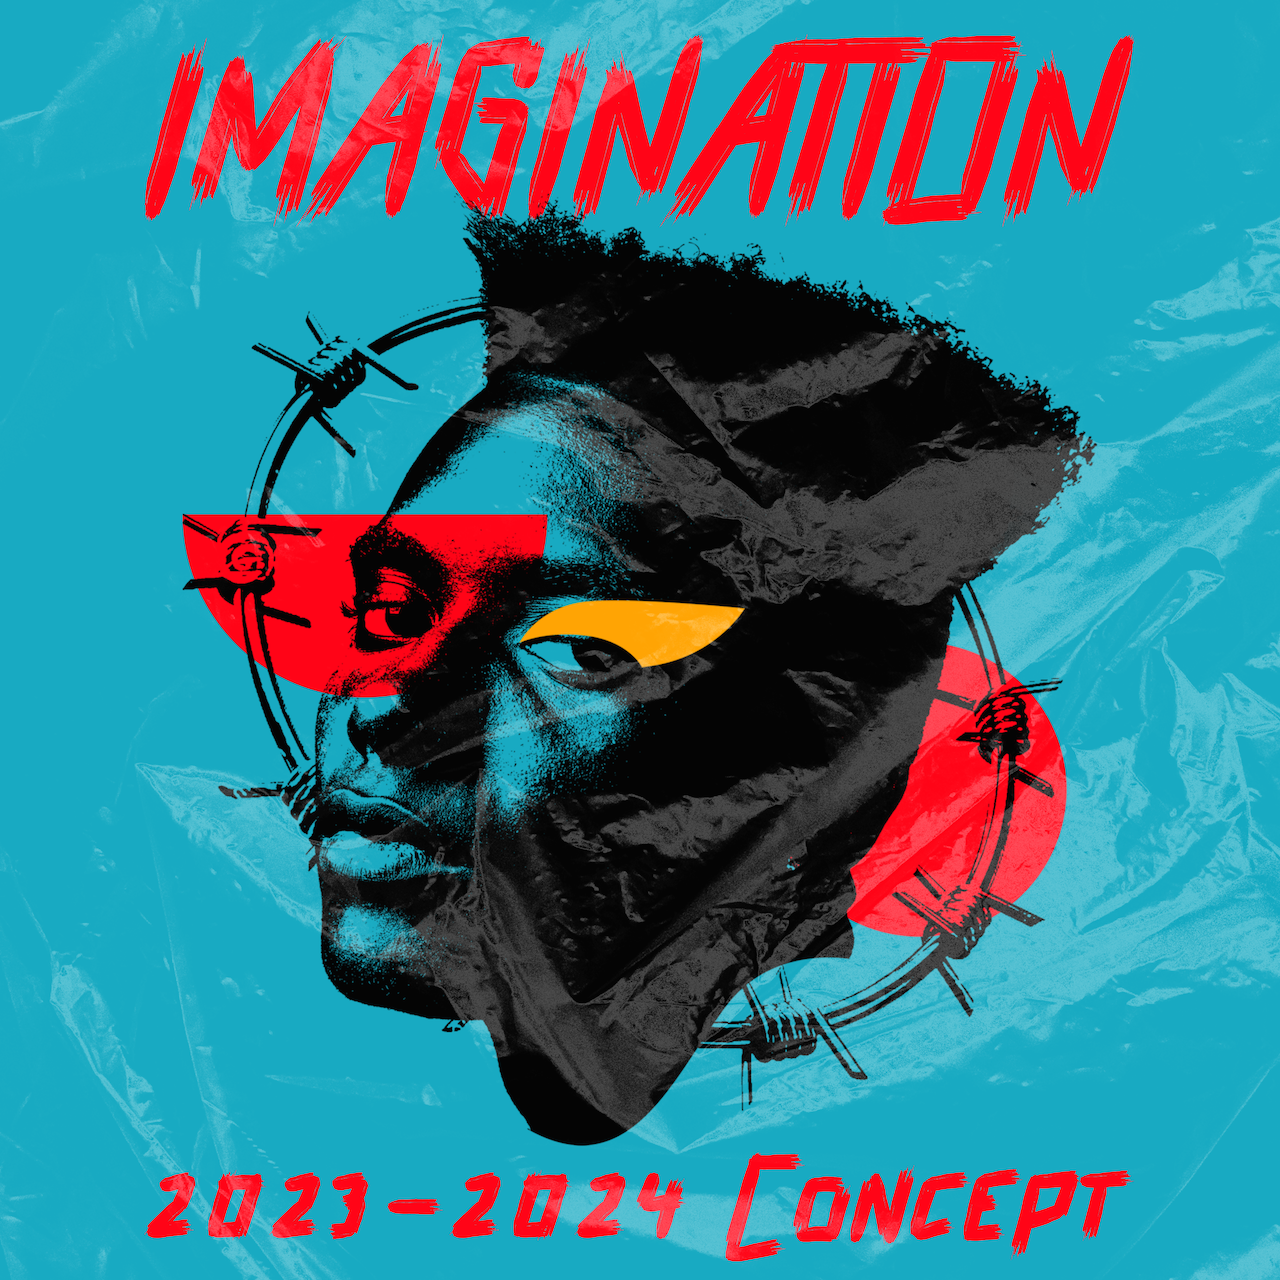 Image of a futuristic album cover with a African American centered on a blue background. At the top, the word "Imagination" is in red letters. At the bottom, 2023-2024 Concept is in red letters